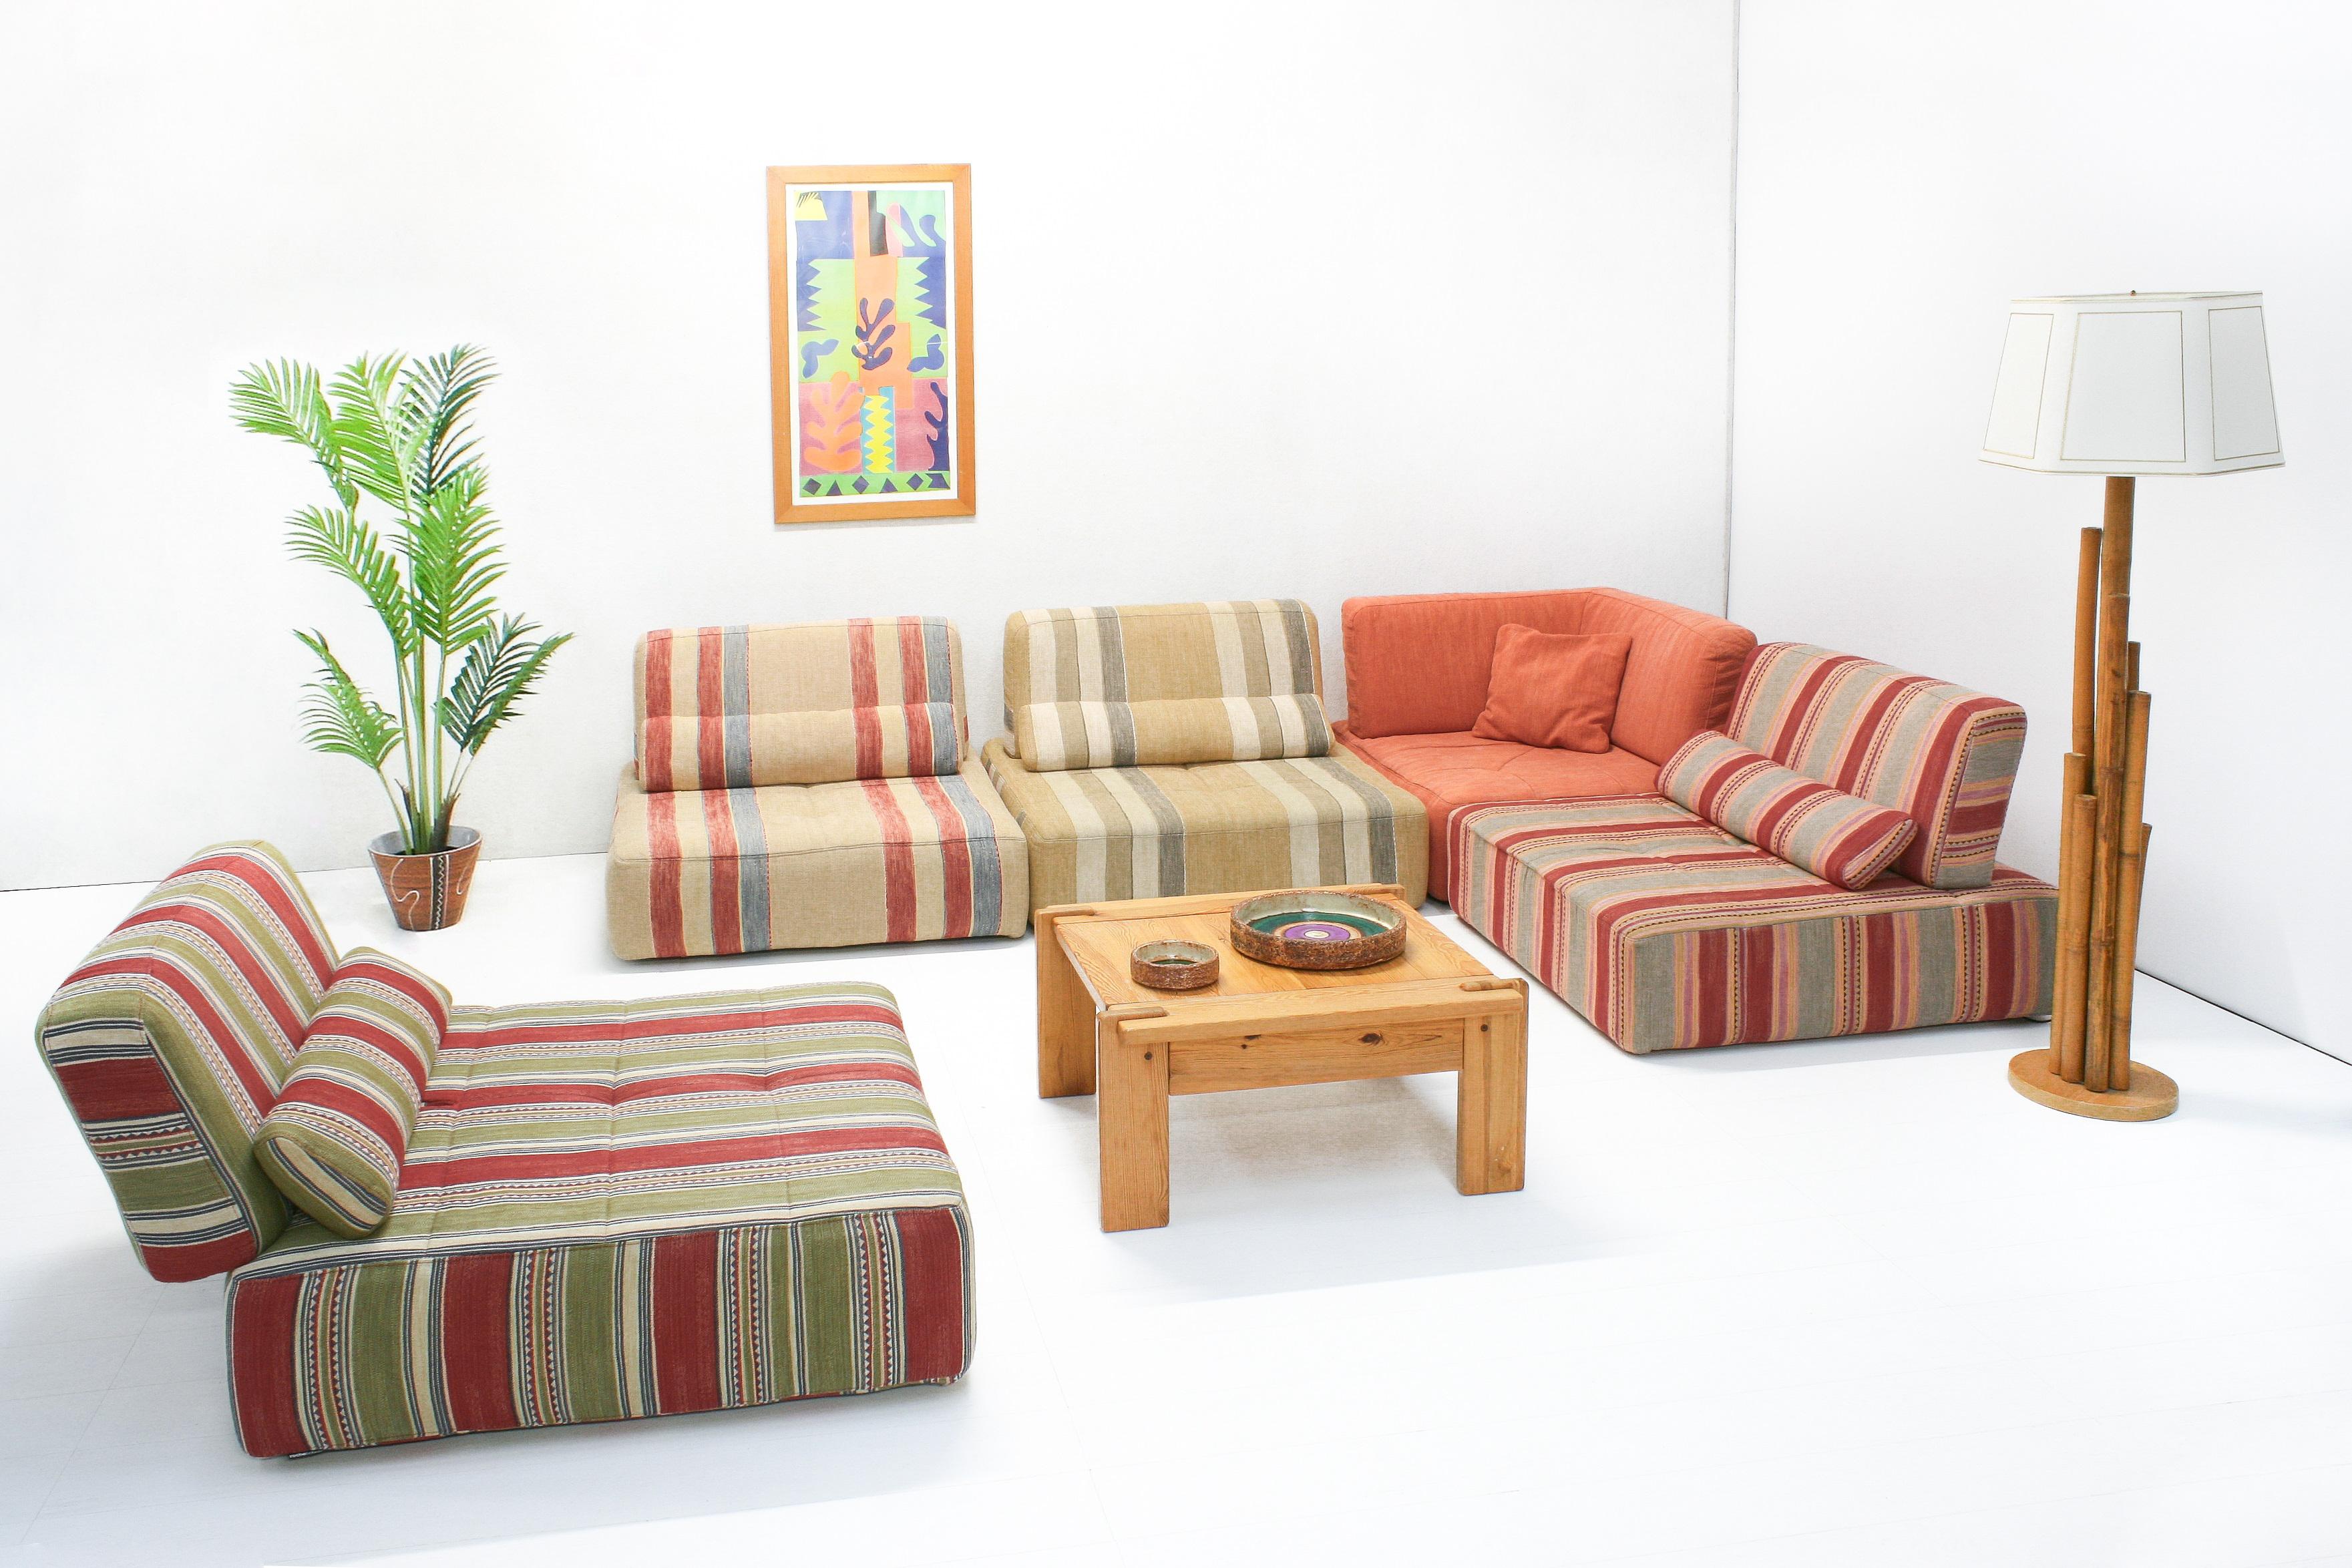 The Parcours sectional sofa was created by Sacha Lakic in 2005.

This version, with the recognisable Bohemian style Voyage Immobile fabric, was only produced for a limited time.

This set consists of 4 straight elements and 1 corner element. Each